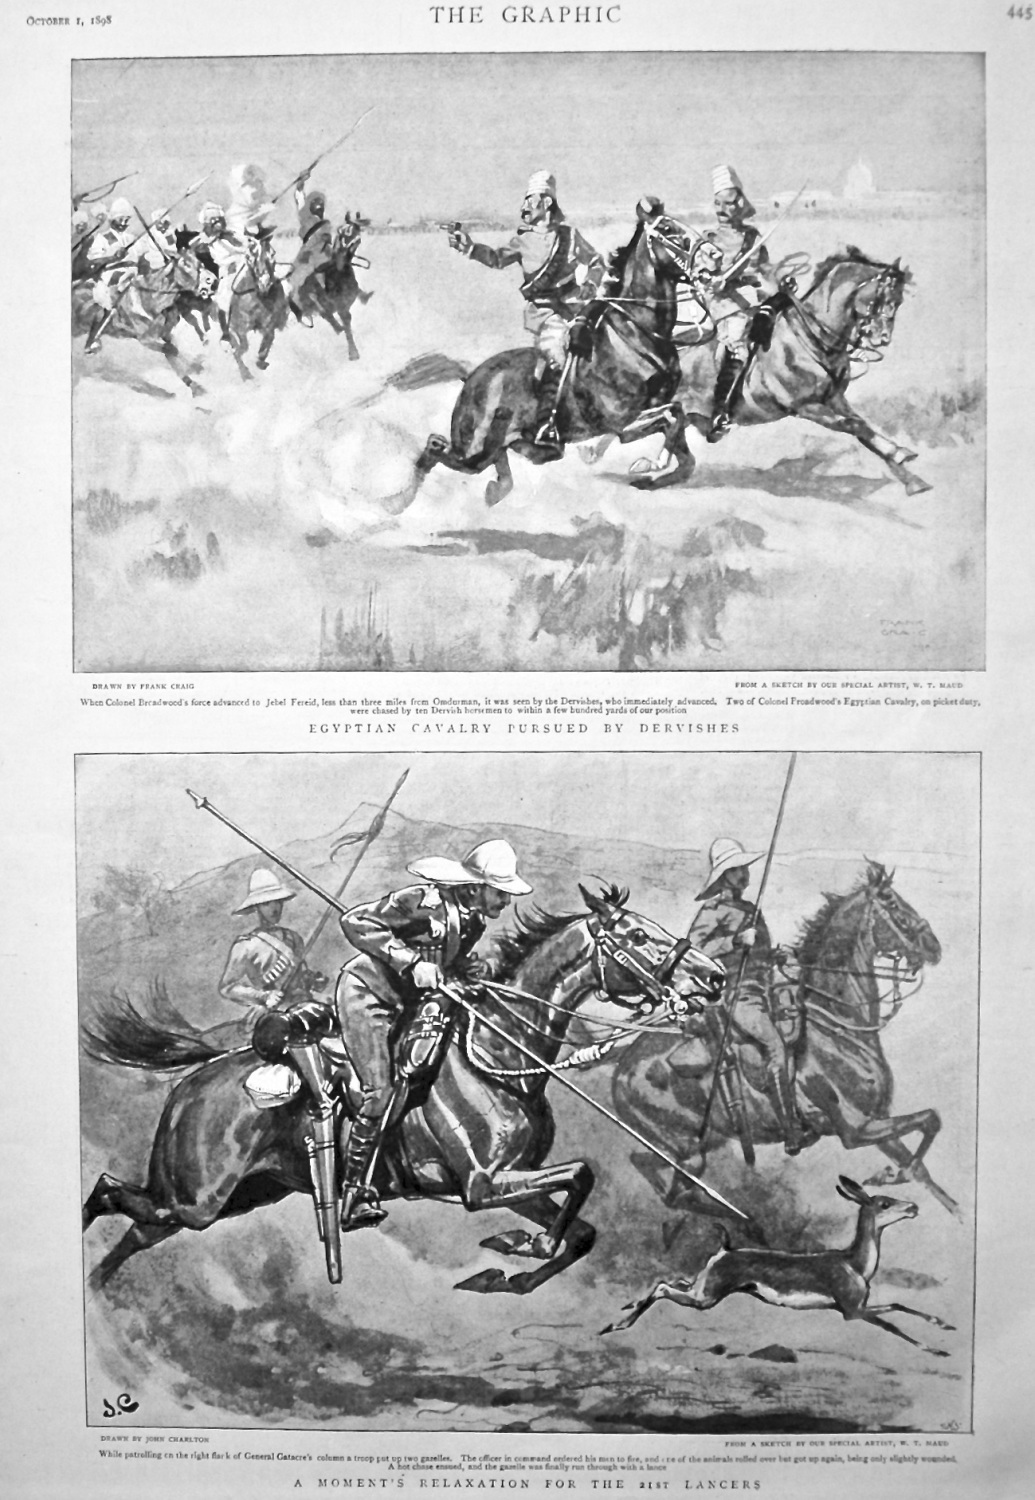 Egyptian Cavalry Pursued by Dervishes. 1898.